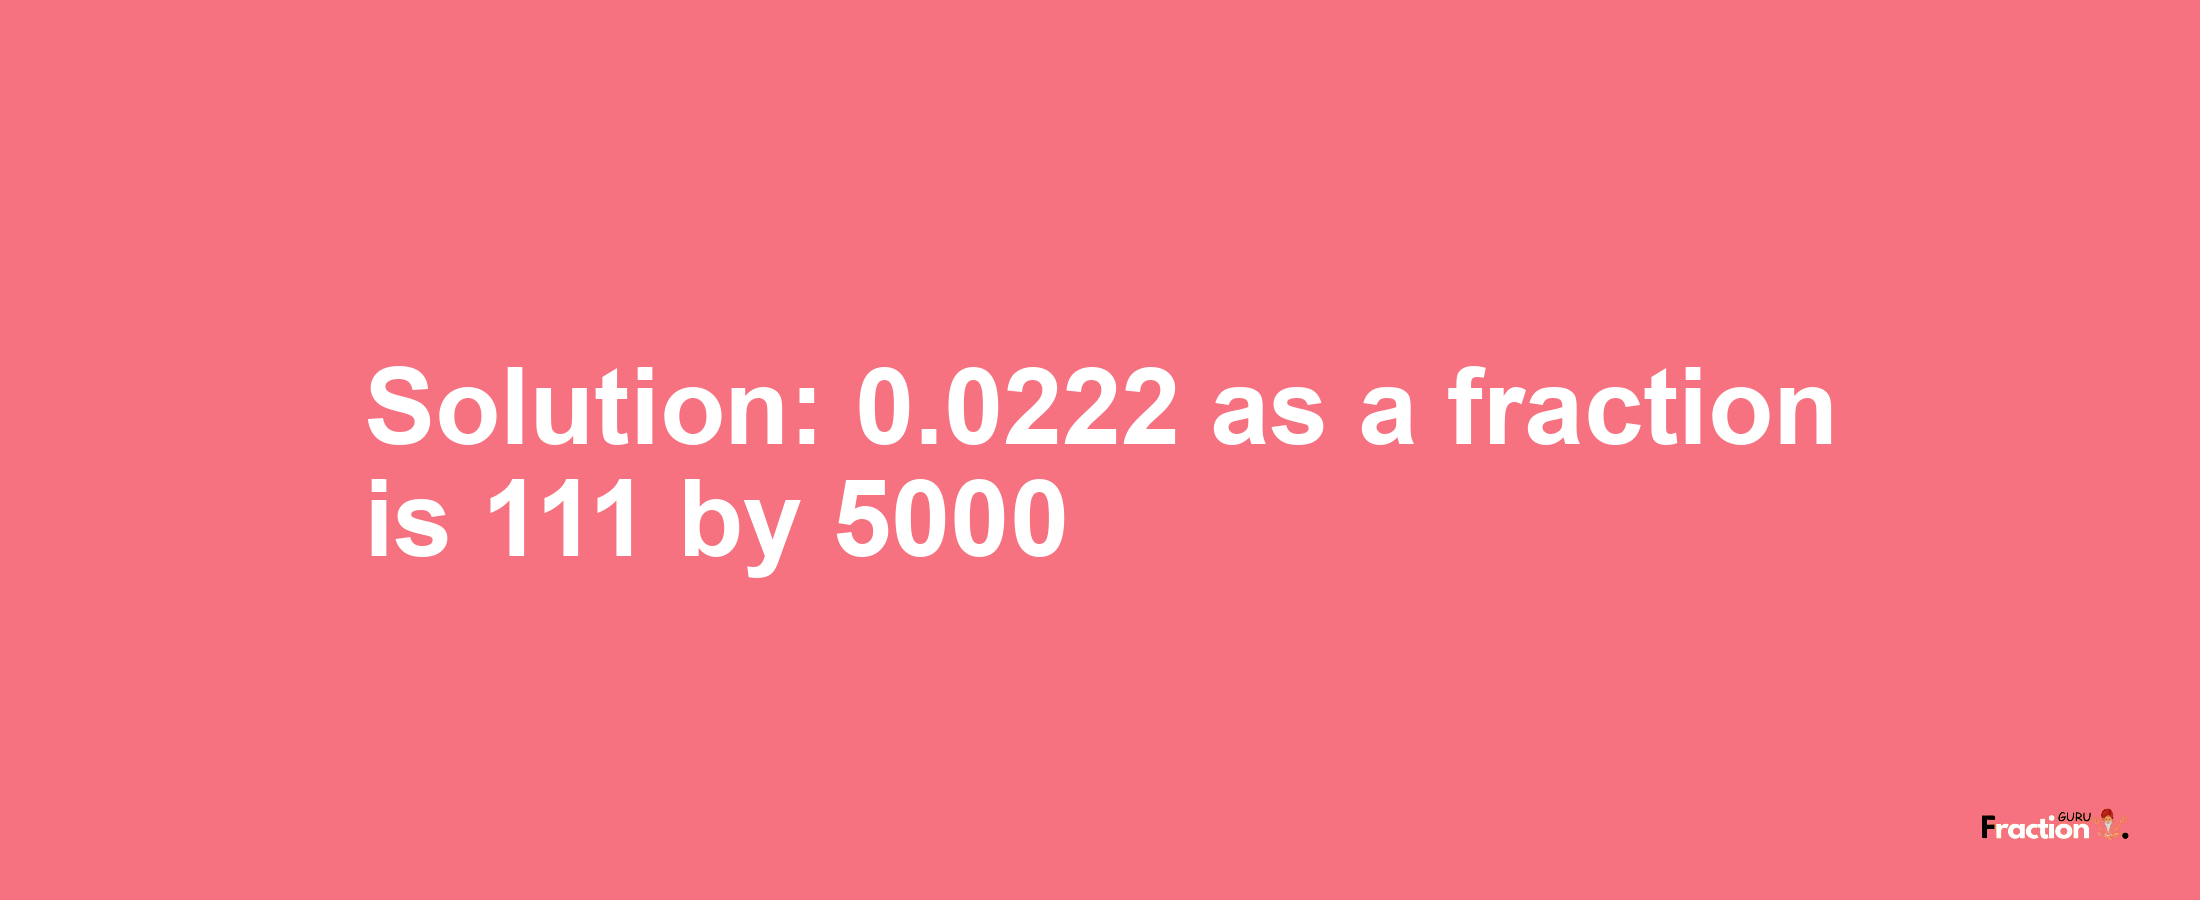 Solution:0.0222 as a fraction is 111/5000